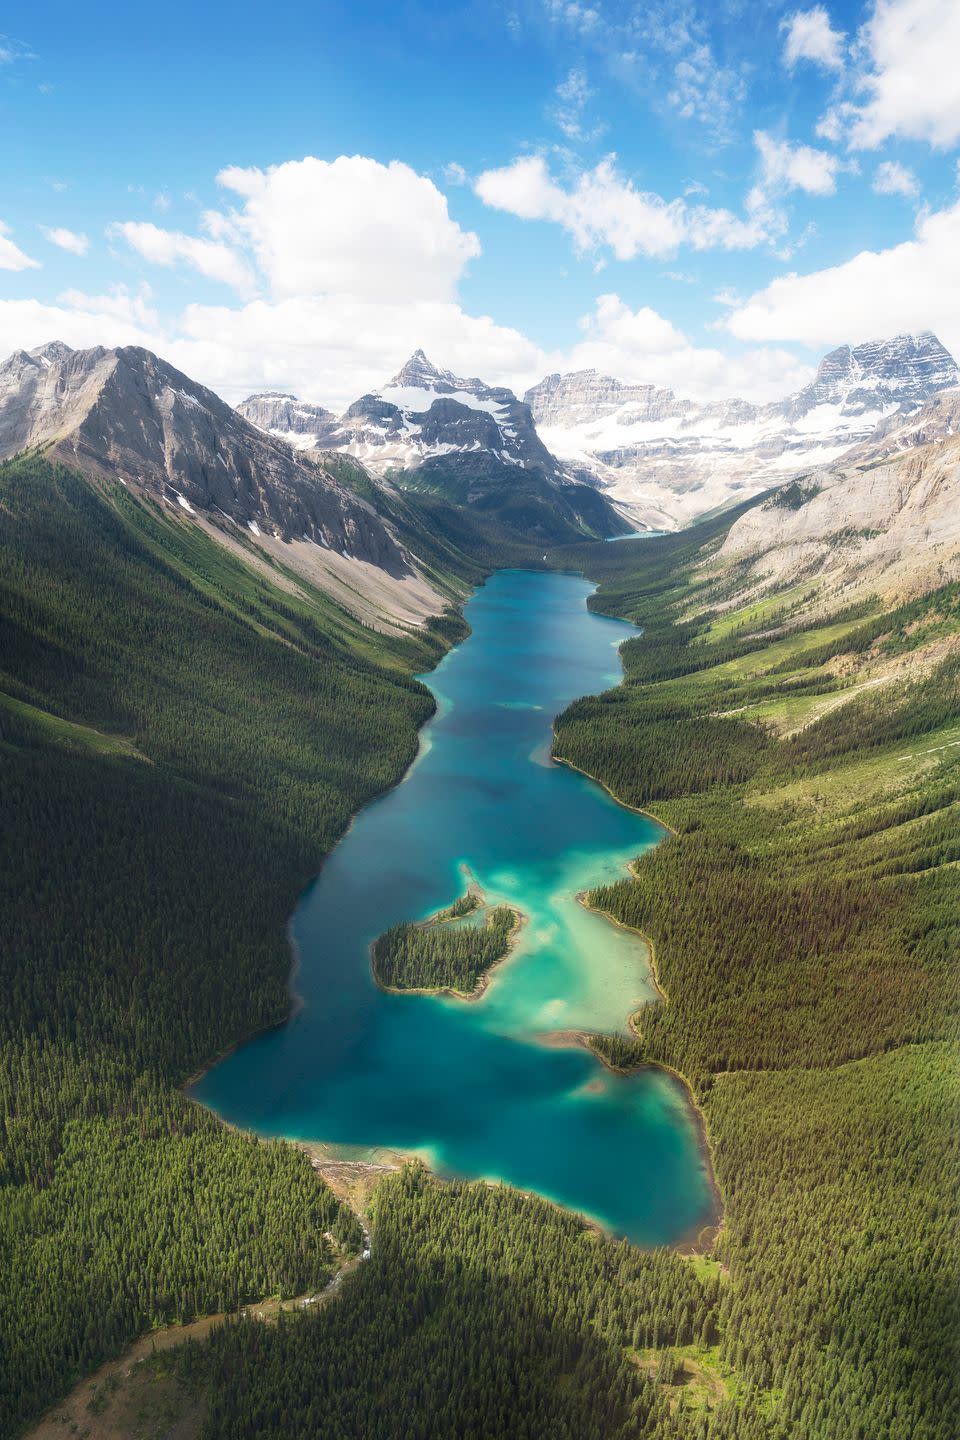 <p>The best time to see the Marvel Lake's vibrant turquoise hue—created by sunlight reflecting off the rock floor—is July and August. But Banff is also home to three world-class ski resorts and is lovely during the winter. </p><p><a class="link rapid-noclick-resp" href="https://go.redirectingat.com?id=74968X1596630&url=https%3A%2F%2Fwww.tripadvisor.com%2FTourism-g154910-Banff_National_Park_Alberta-Vacations.html&sref=https%3A%2F%2Fwww.housebeautiful.com%2Flifestyle%2Fg4500%2Fmost-beautiful-places-world%2F" rel="nofollow noopener" target="_blank" data-ylk="slk:LEARN MORE">LEARN MORE</a> </p>